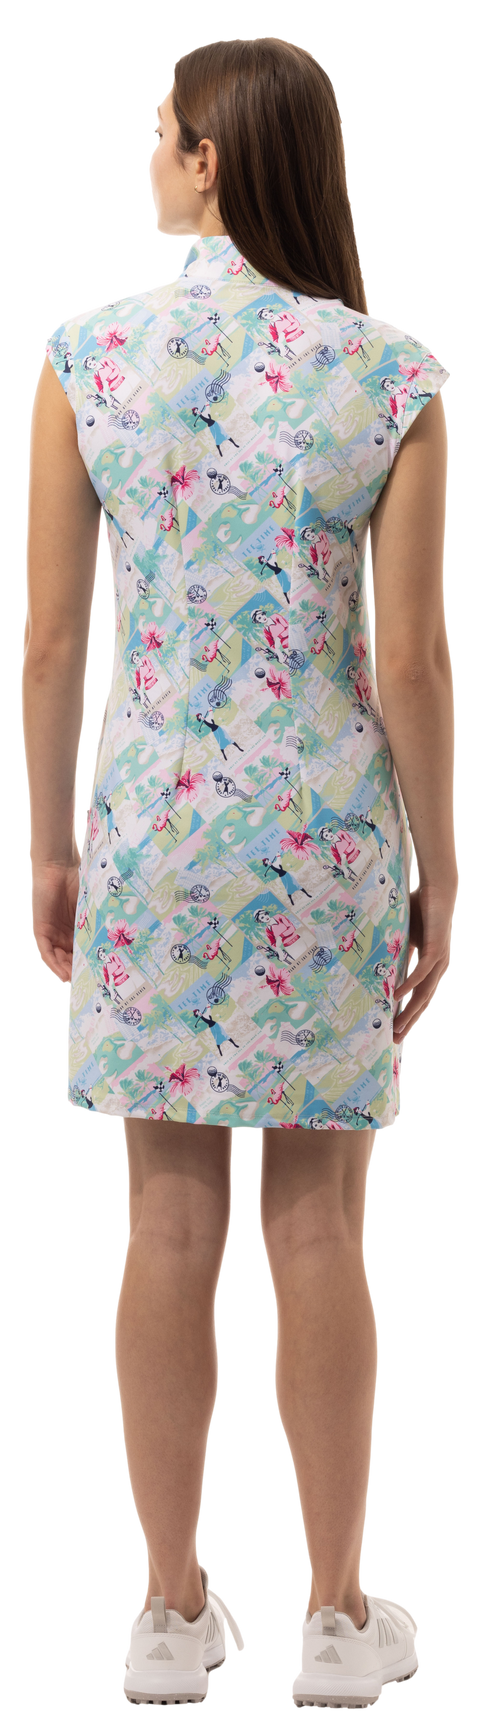 SOLSTYLE COOL SLEEVELESS ZIP MOCK DRESS. BY THE SEA. 900722C